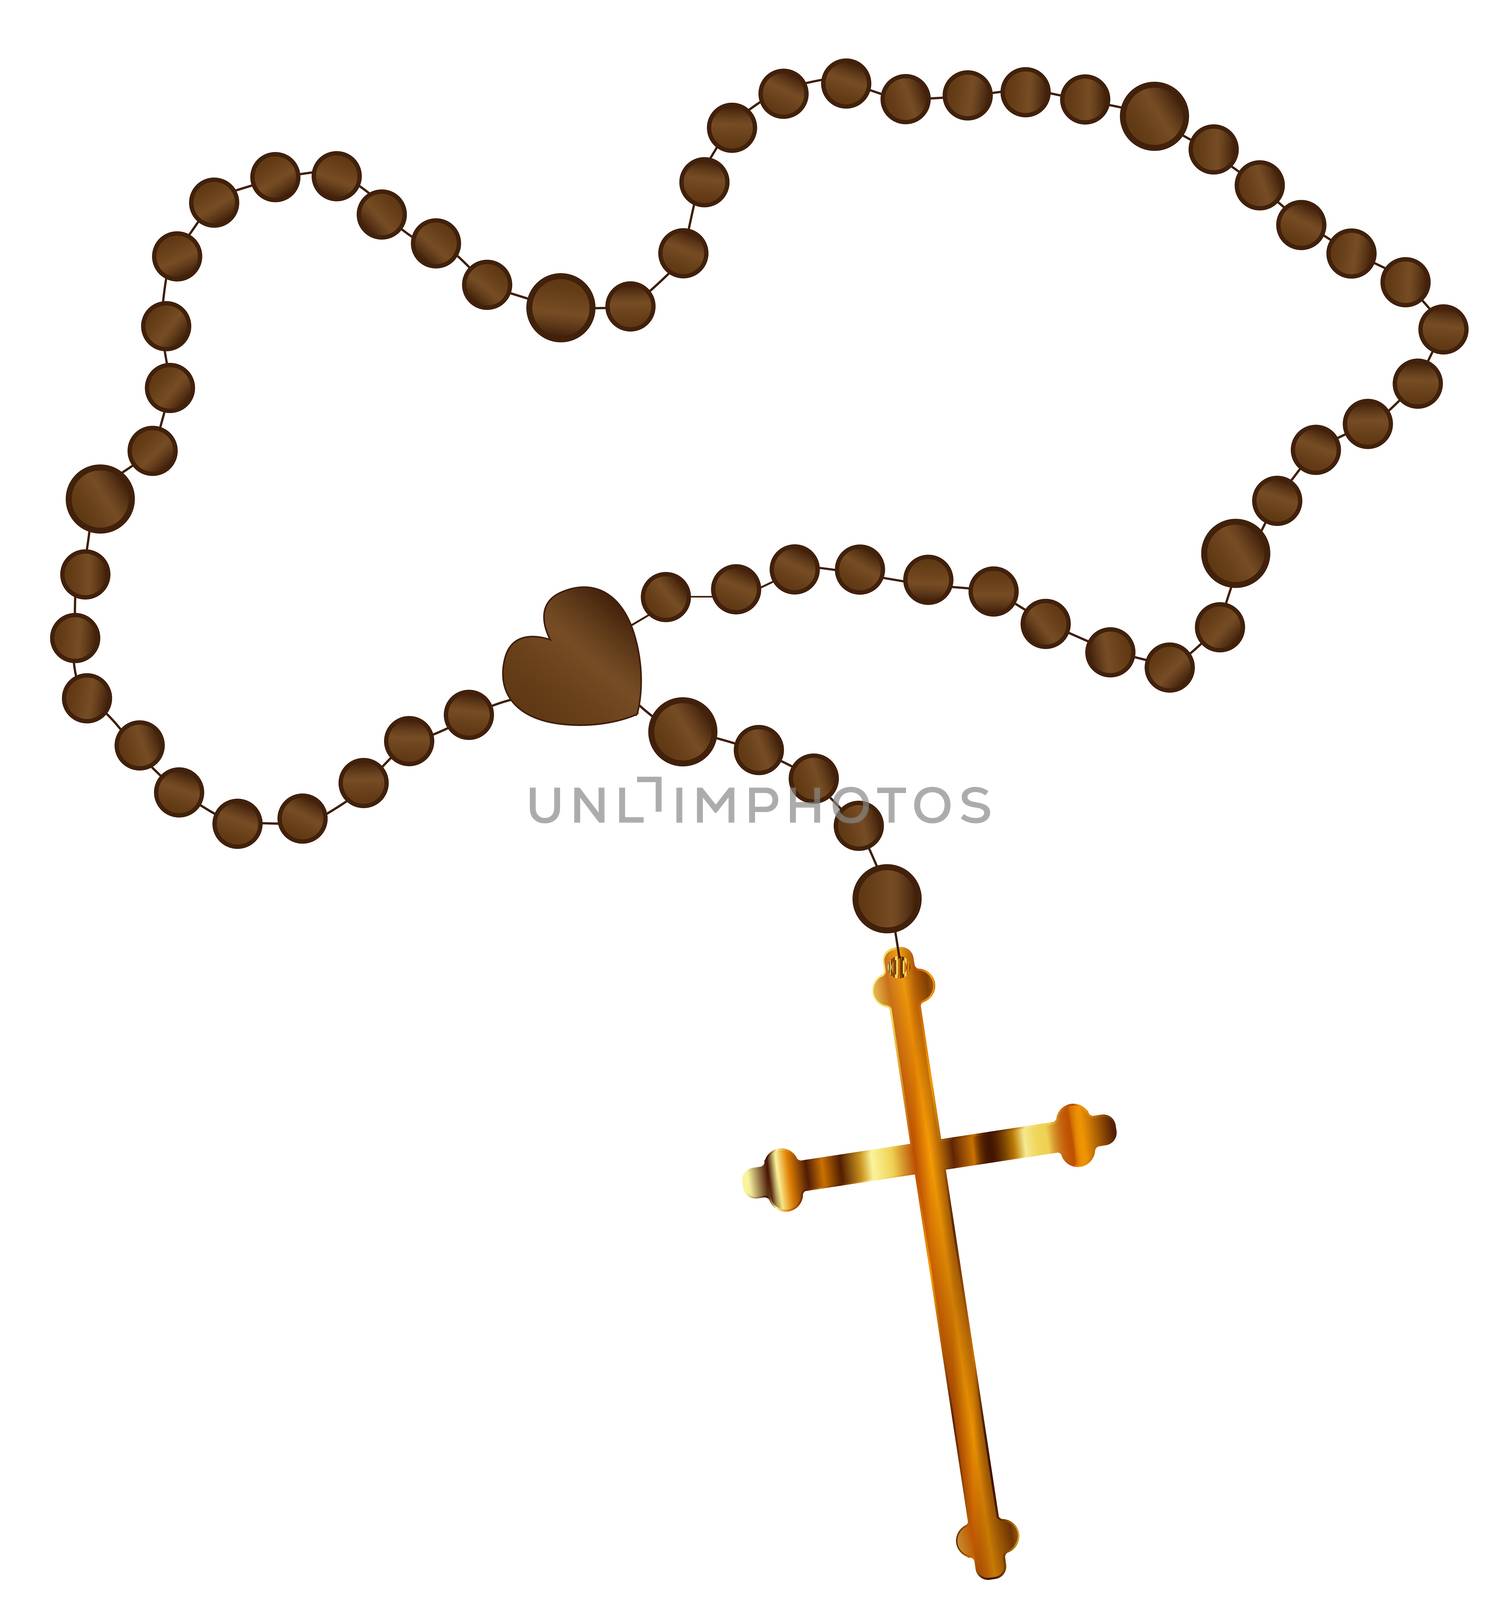 Catholic rosary beads with a golden cross all over a white background